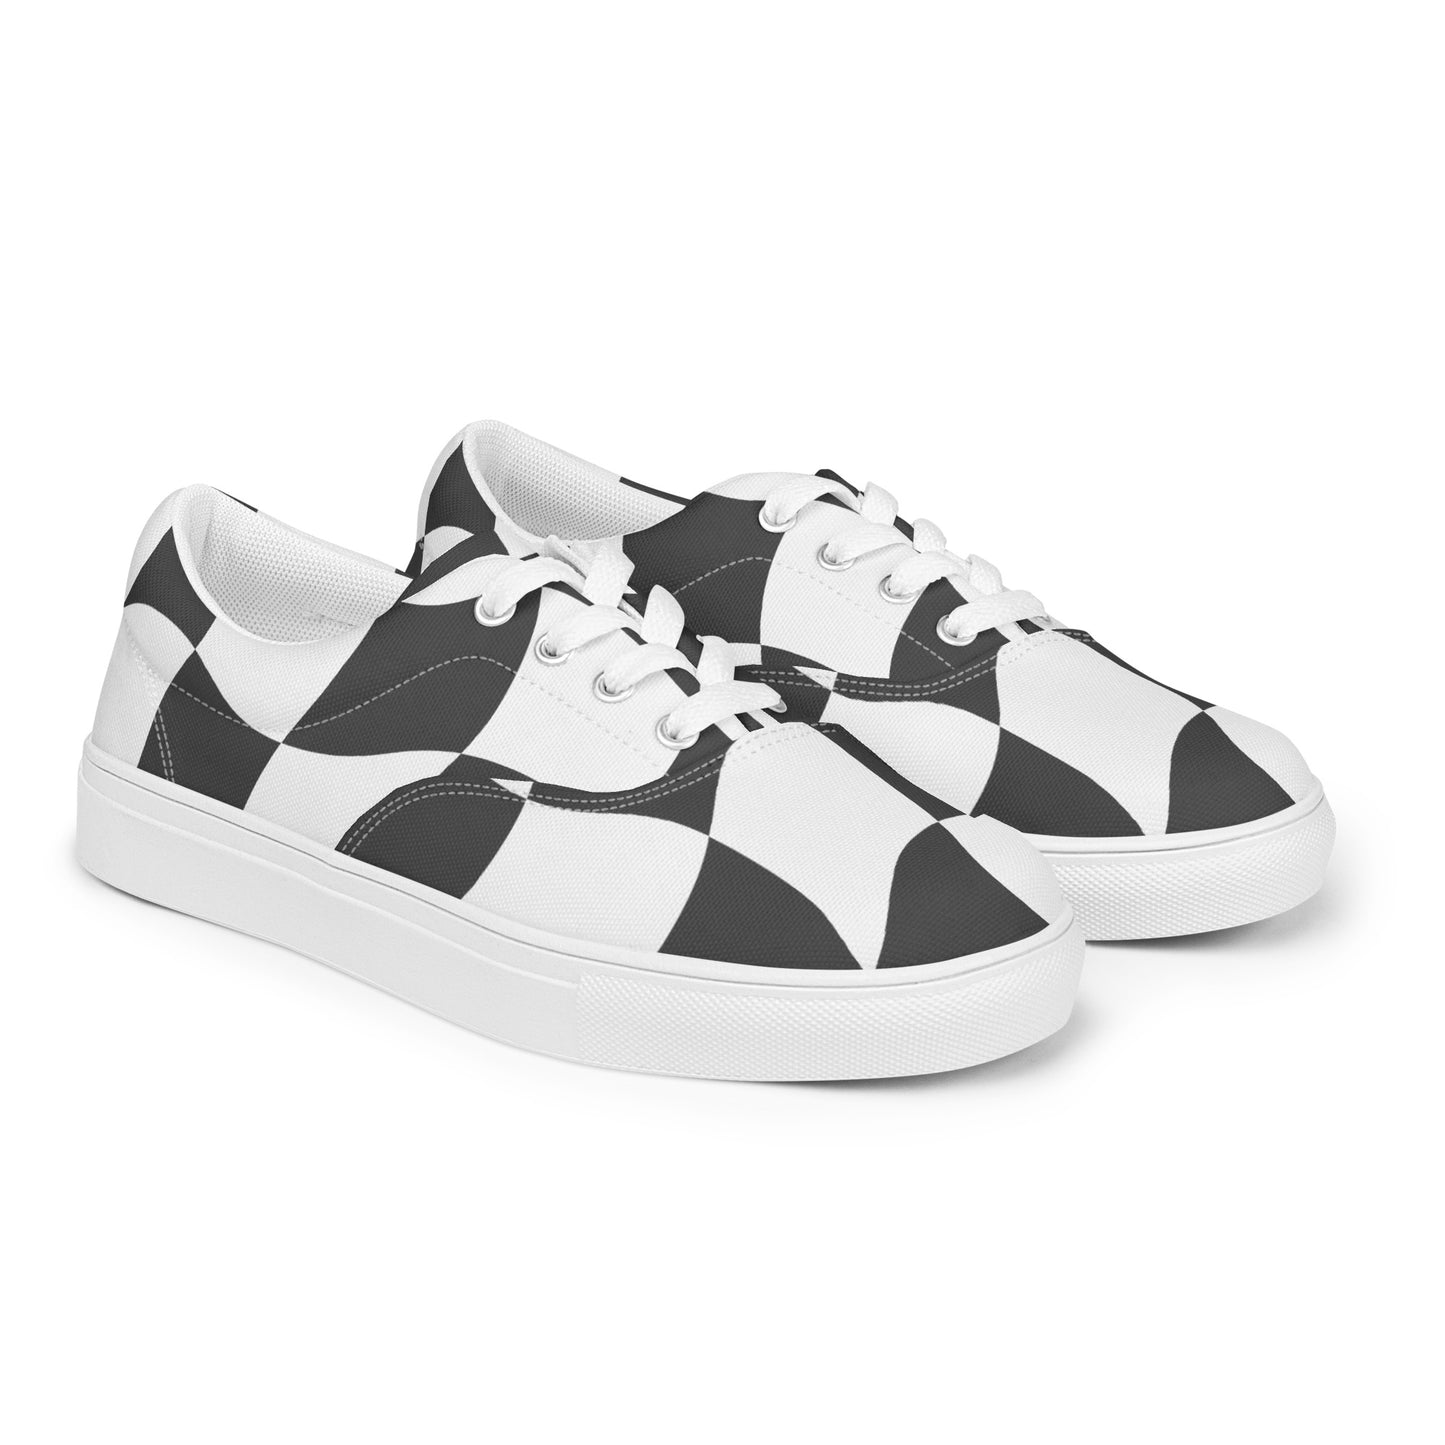 Men’s Lace-Up Canvas Wavy Checkerboard Shoes